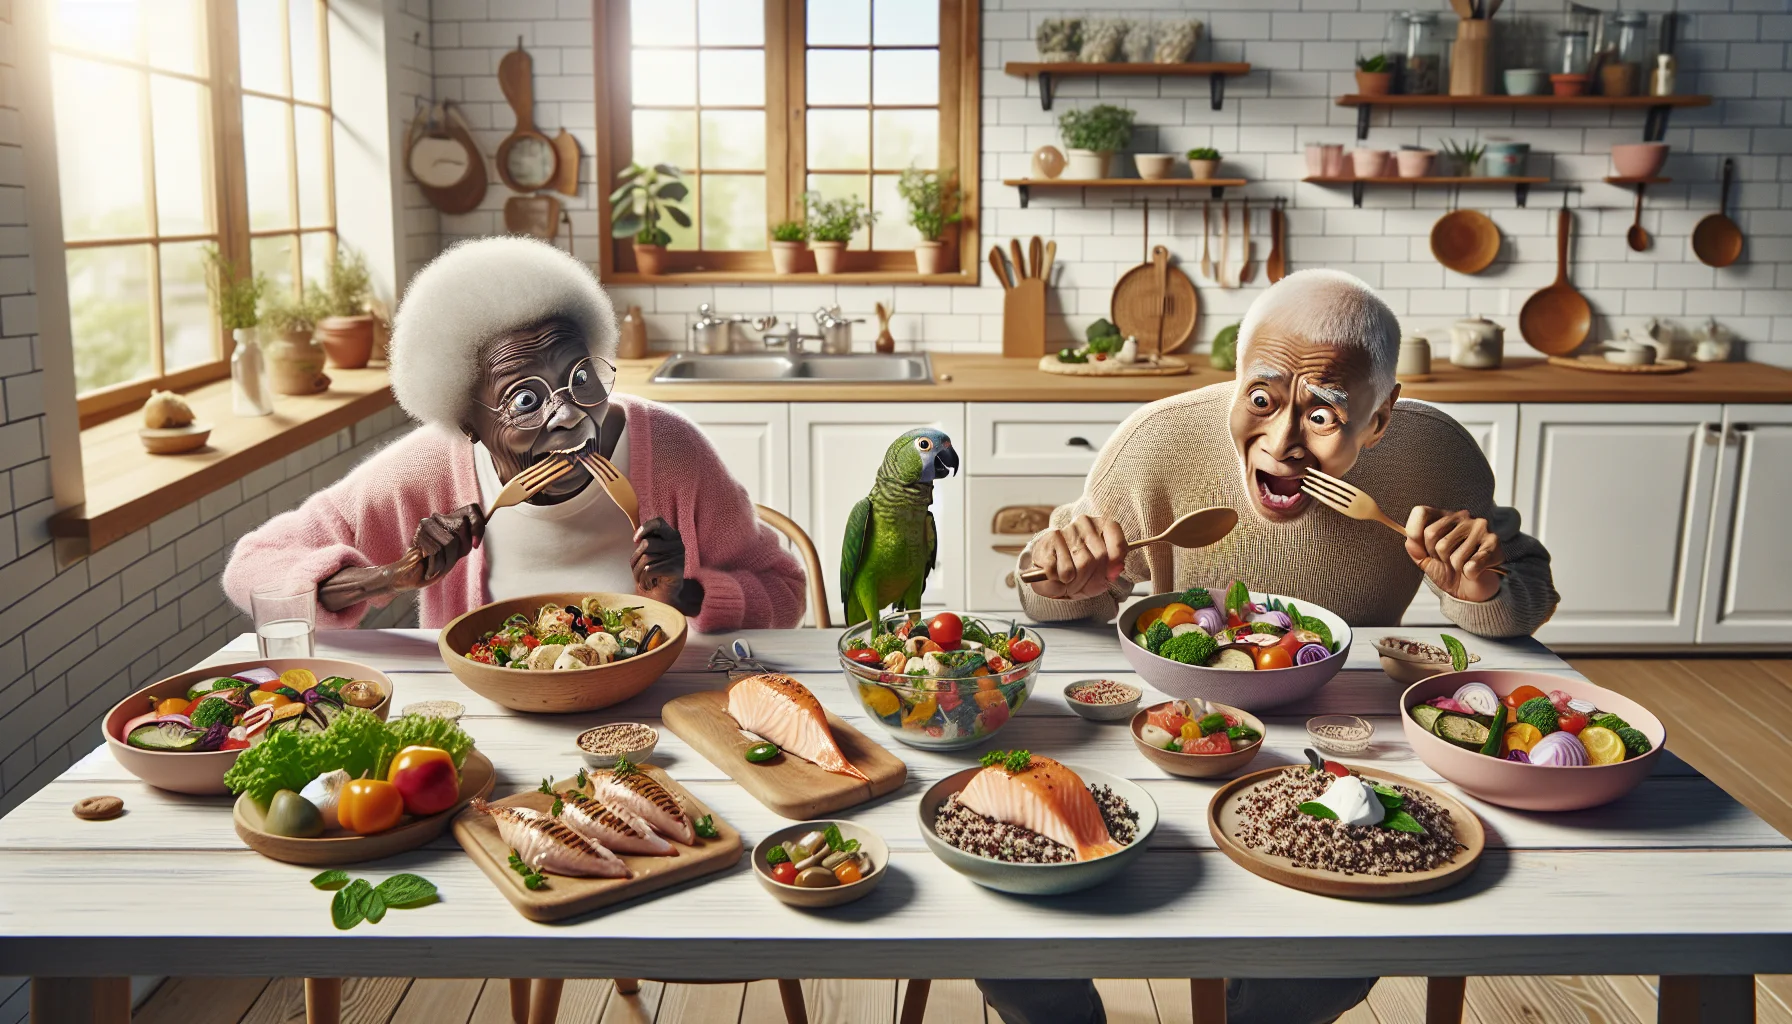 A comedic, realistic scene in an airy, sunlit kitchen. There are numerous dishes prepared from recipes by a popular online cooking website known for individual portion meals. On the table, there's a variety of colorful, healthy dishes like grilled vegetables, quinoa salad, and poached salmon. Two elderly people, one of African descent and the other of East Asian descent, who are clearly on a diet, are both attempting to eat their healthy dishes using oversized wooden cutlery, with quirky and exaggerated facial expressions. Meanwhile, a parrot, mimicking their dialogue about healthy eating, is sneakily helping itself to some of the food.